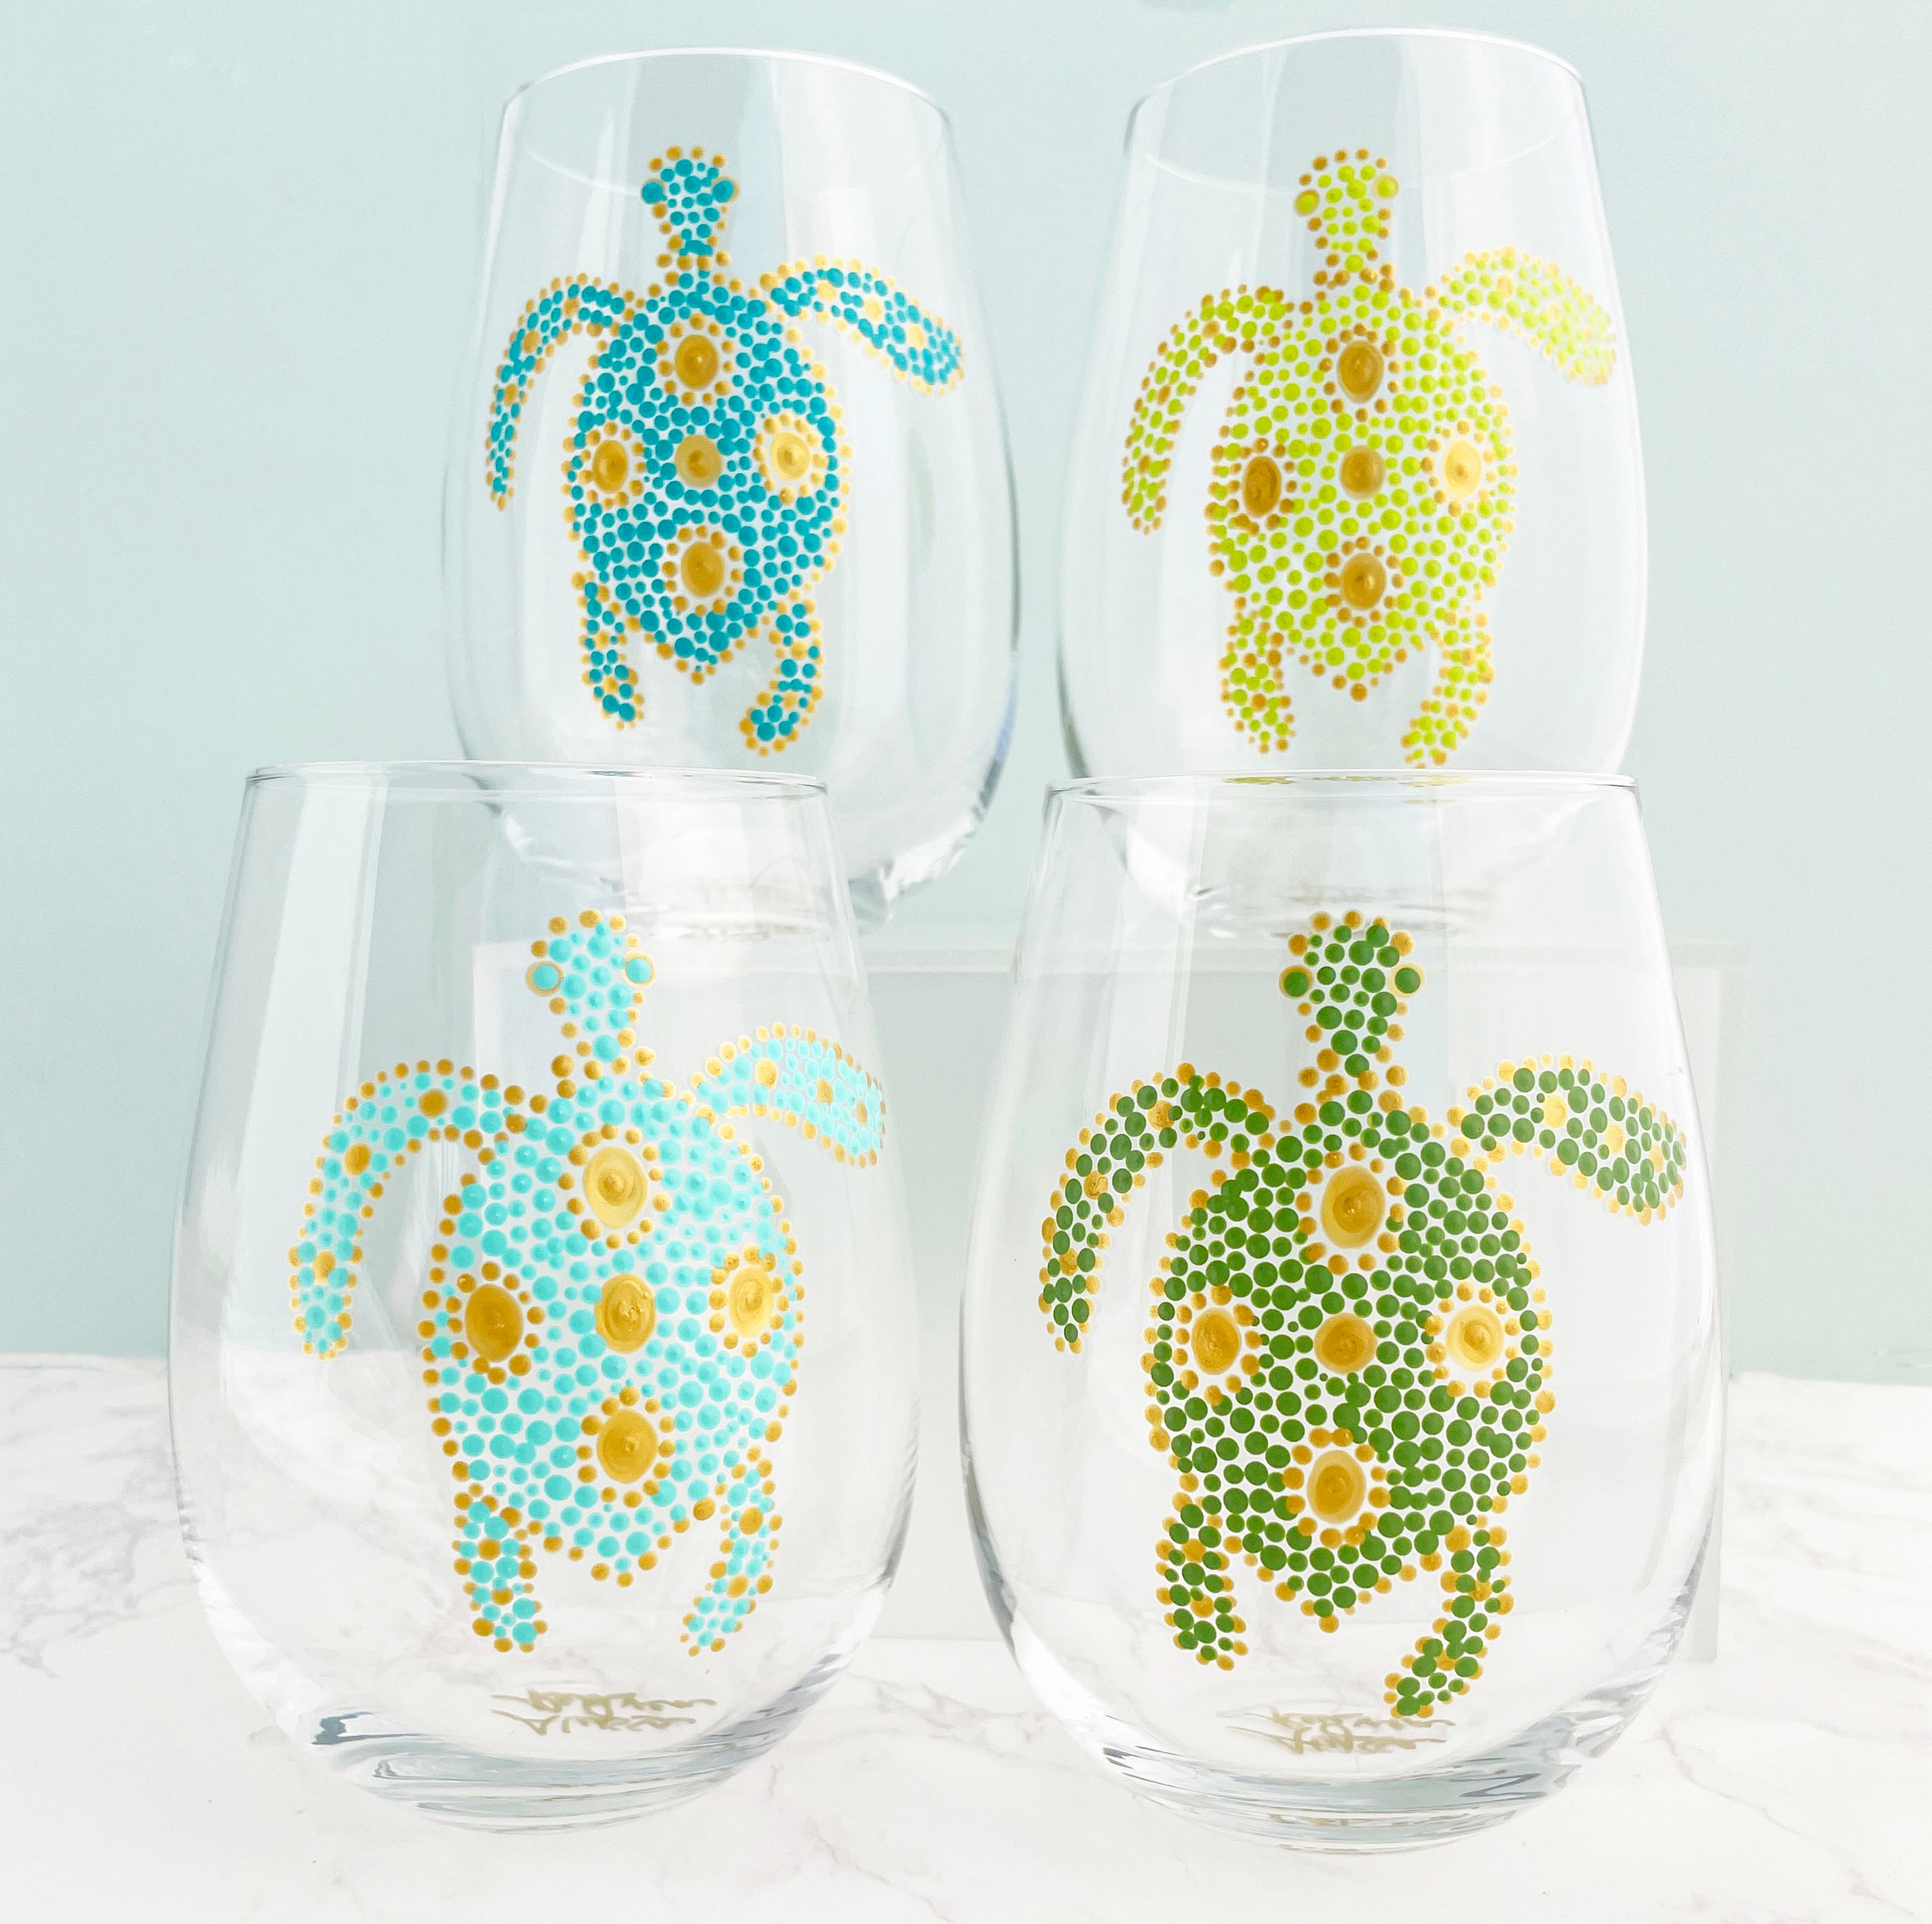 Sea Turtle Wine Glass, Etched Stemless Wine Glass, Engraved Wine